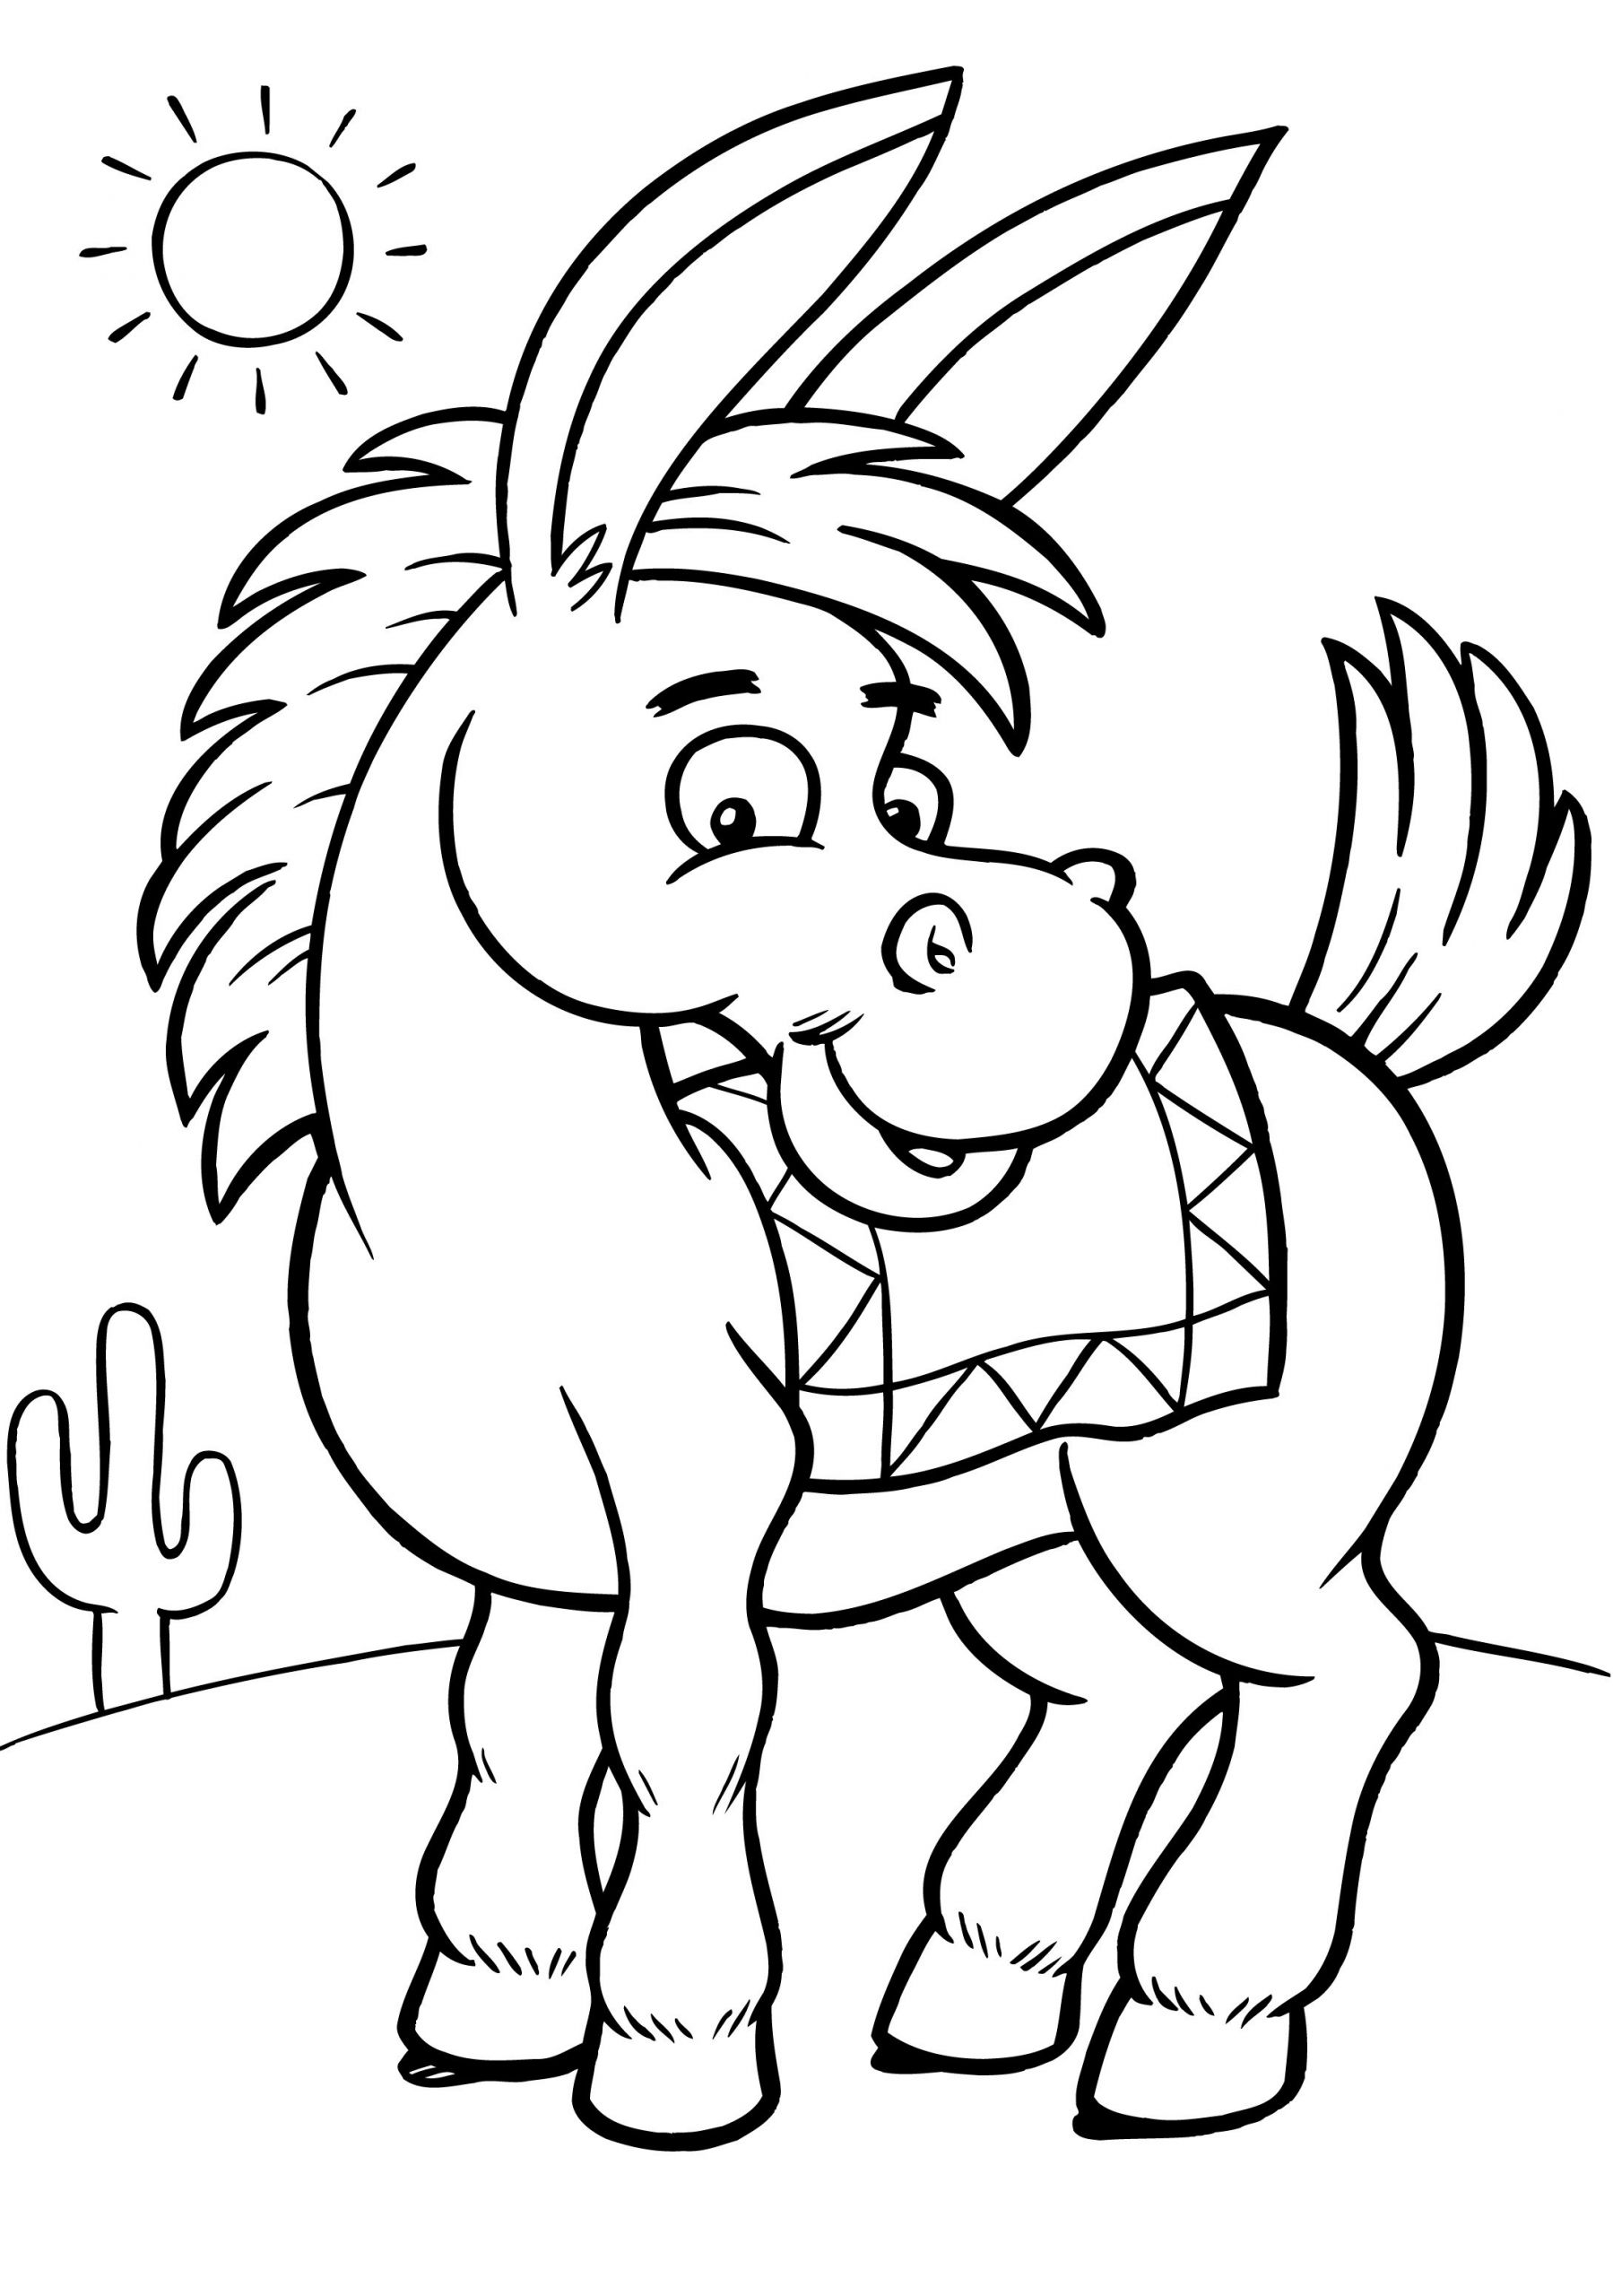 Free Coloring Sheets For Kids
 Free Printable Donkey Coloring Pages For Kids